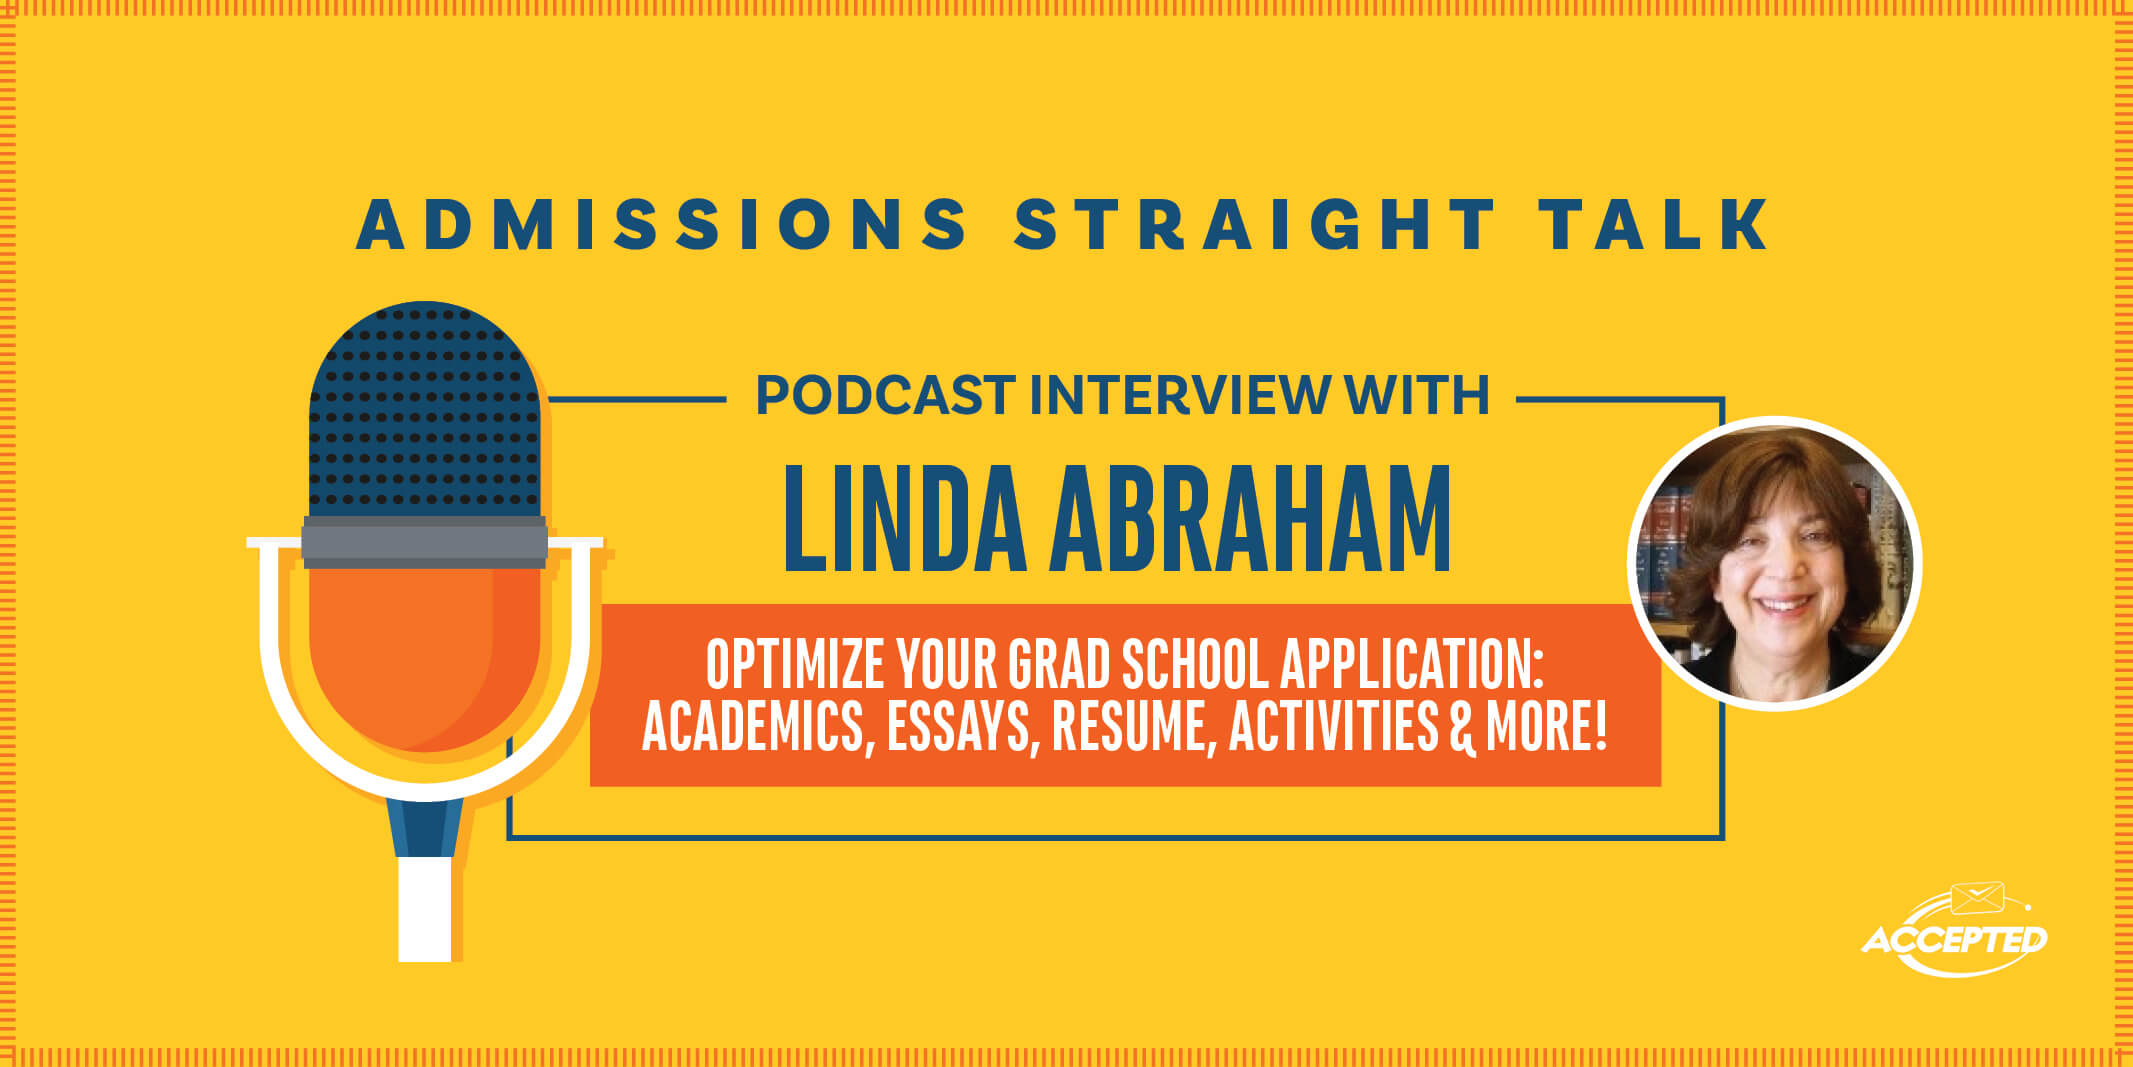 Maximize the Impact of your Grad School Application